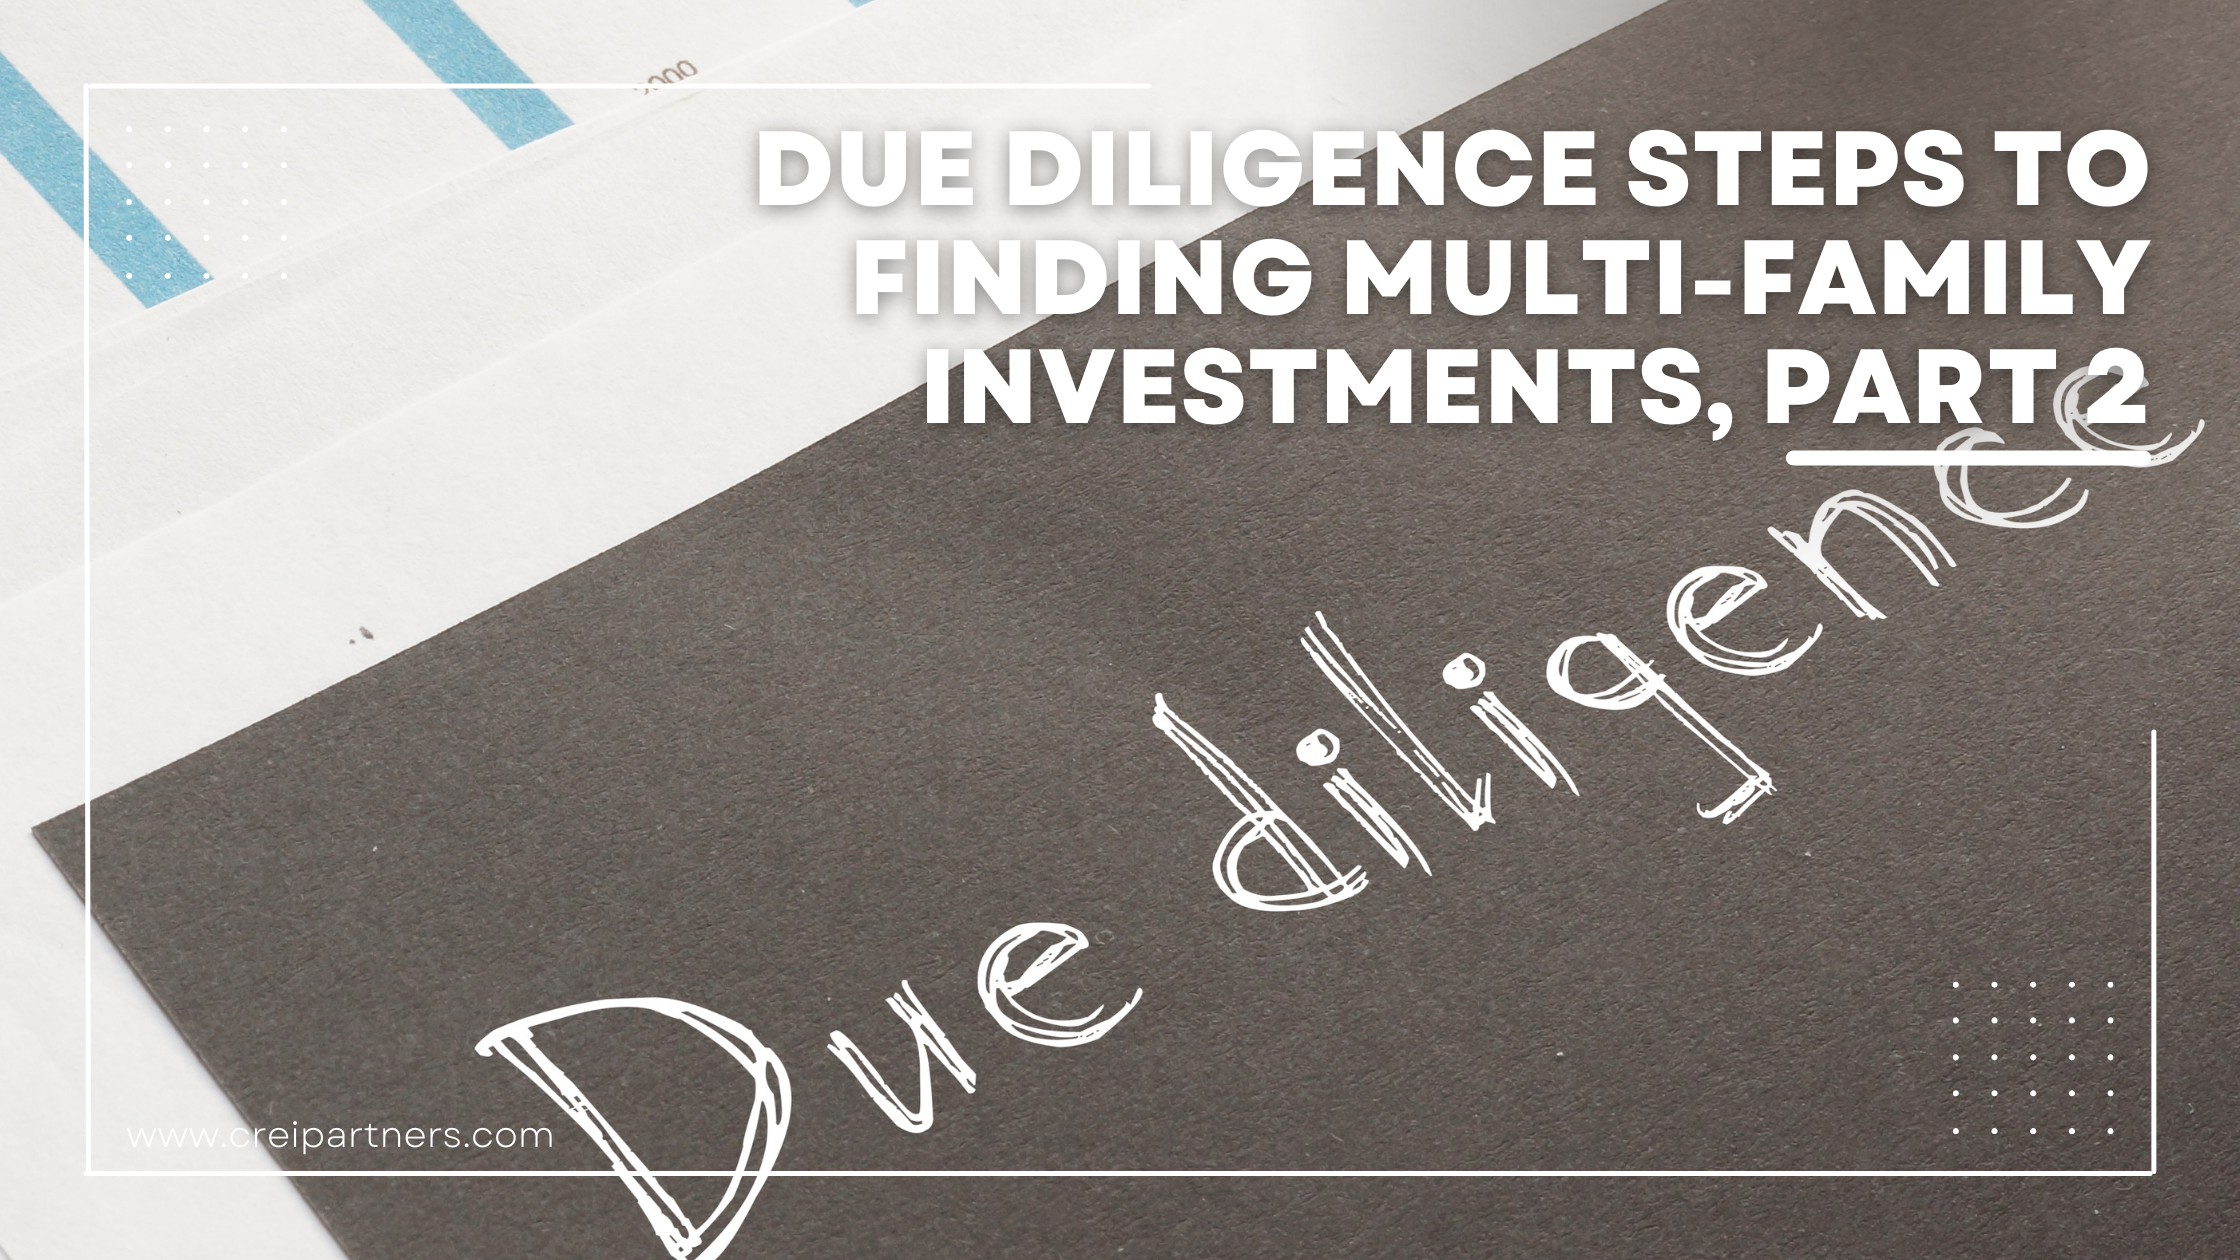 Due Diligence Steps to Finding Multi-Family Investments, Part 2